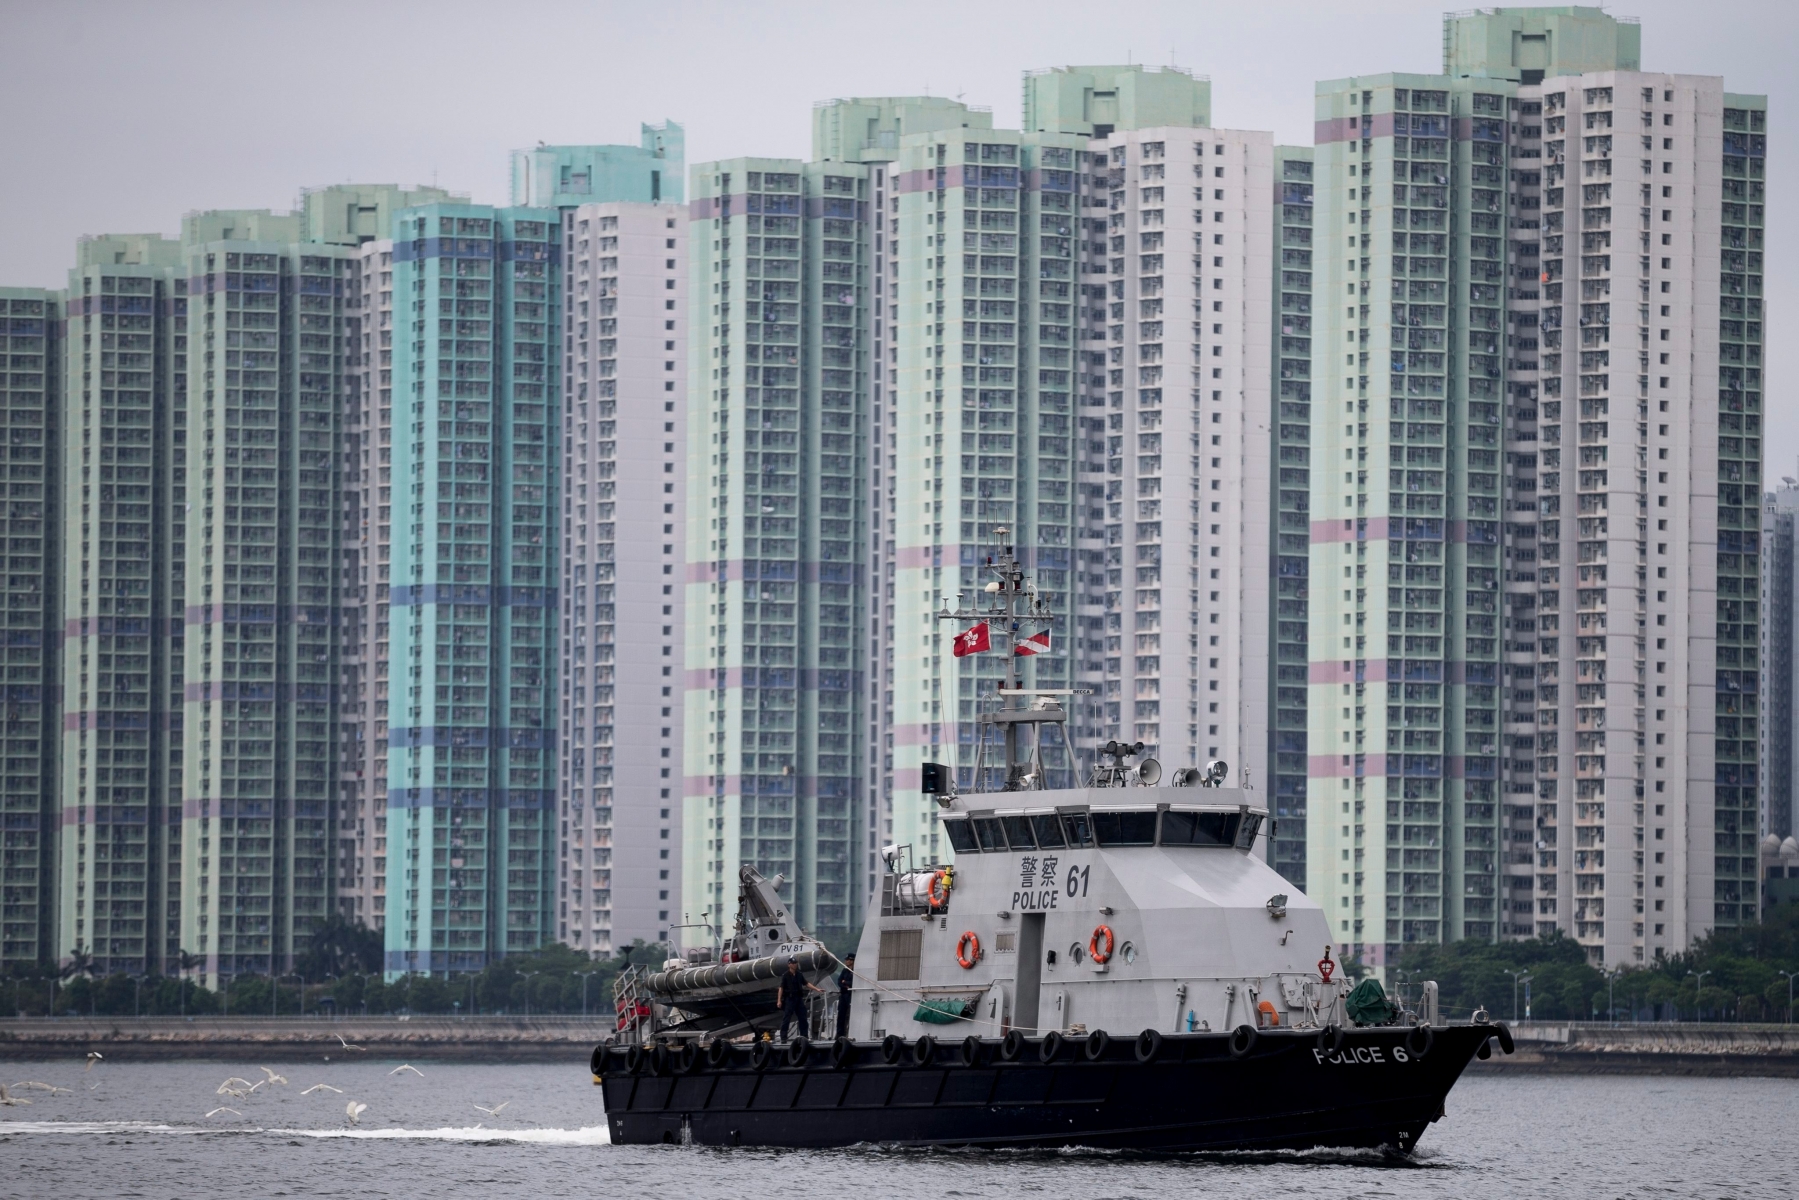 epa05313626 A police boat patrols Tolo Harbour near Hong Kong Science Park where Zhang Dejiang, chairman of the Standing Committee of the National People's Congress, is visiting in Hong Kong, China, 18 May 2016. Reports says about 8,000 officers are being deployed to maintain security during the most eventful day of state leader Zhang's visit.  EPA/JEROME FAVRE CHINA HONG KONG POLICE